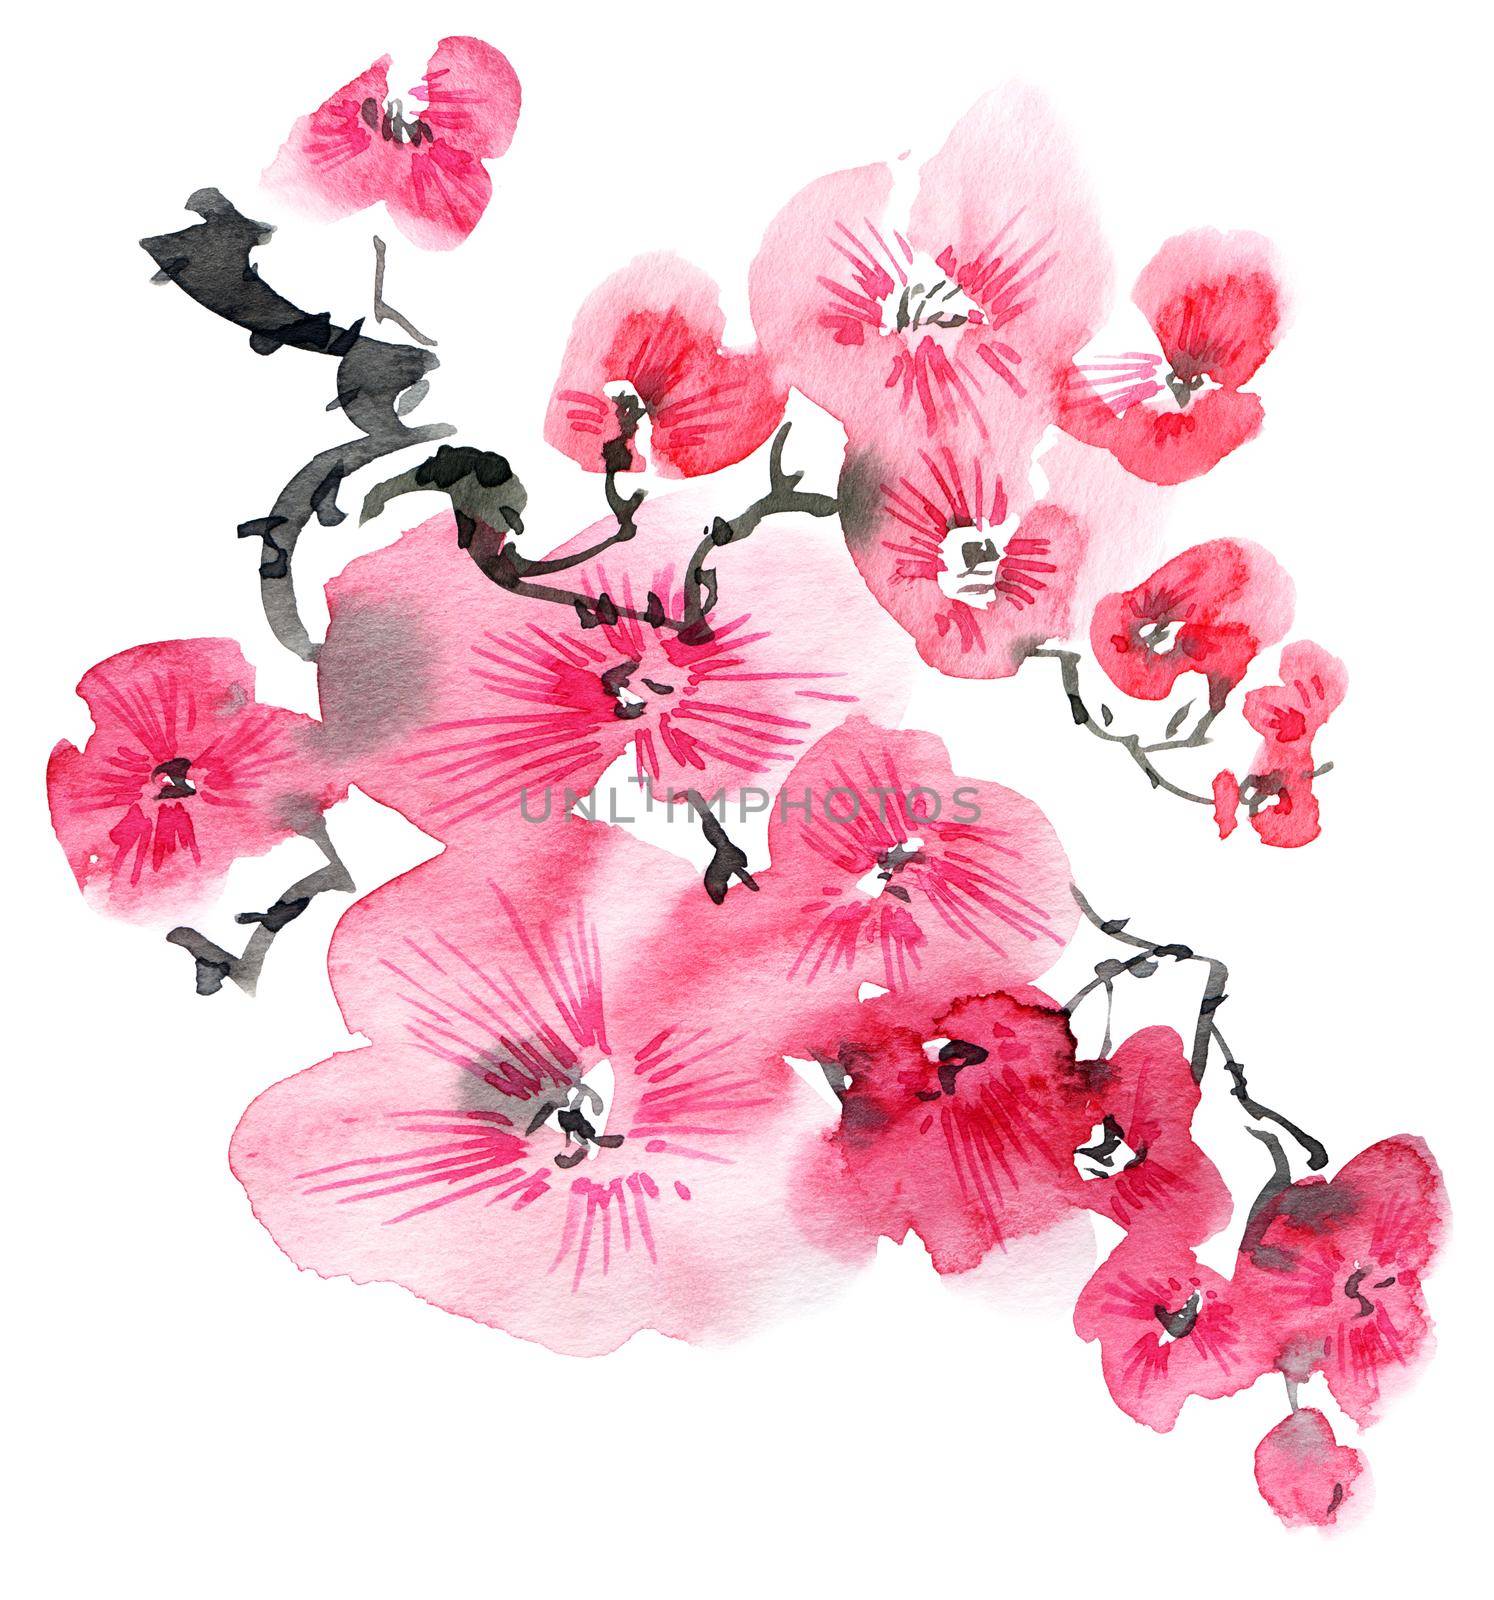 Watercolor and ink illustration of blossom sakura tree with pink flowers and buds. Oriental traditional painting in style sumi-e, u-sin and gohua. Tree branch on white background.